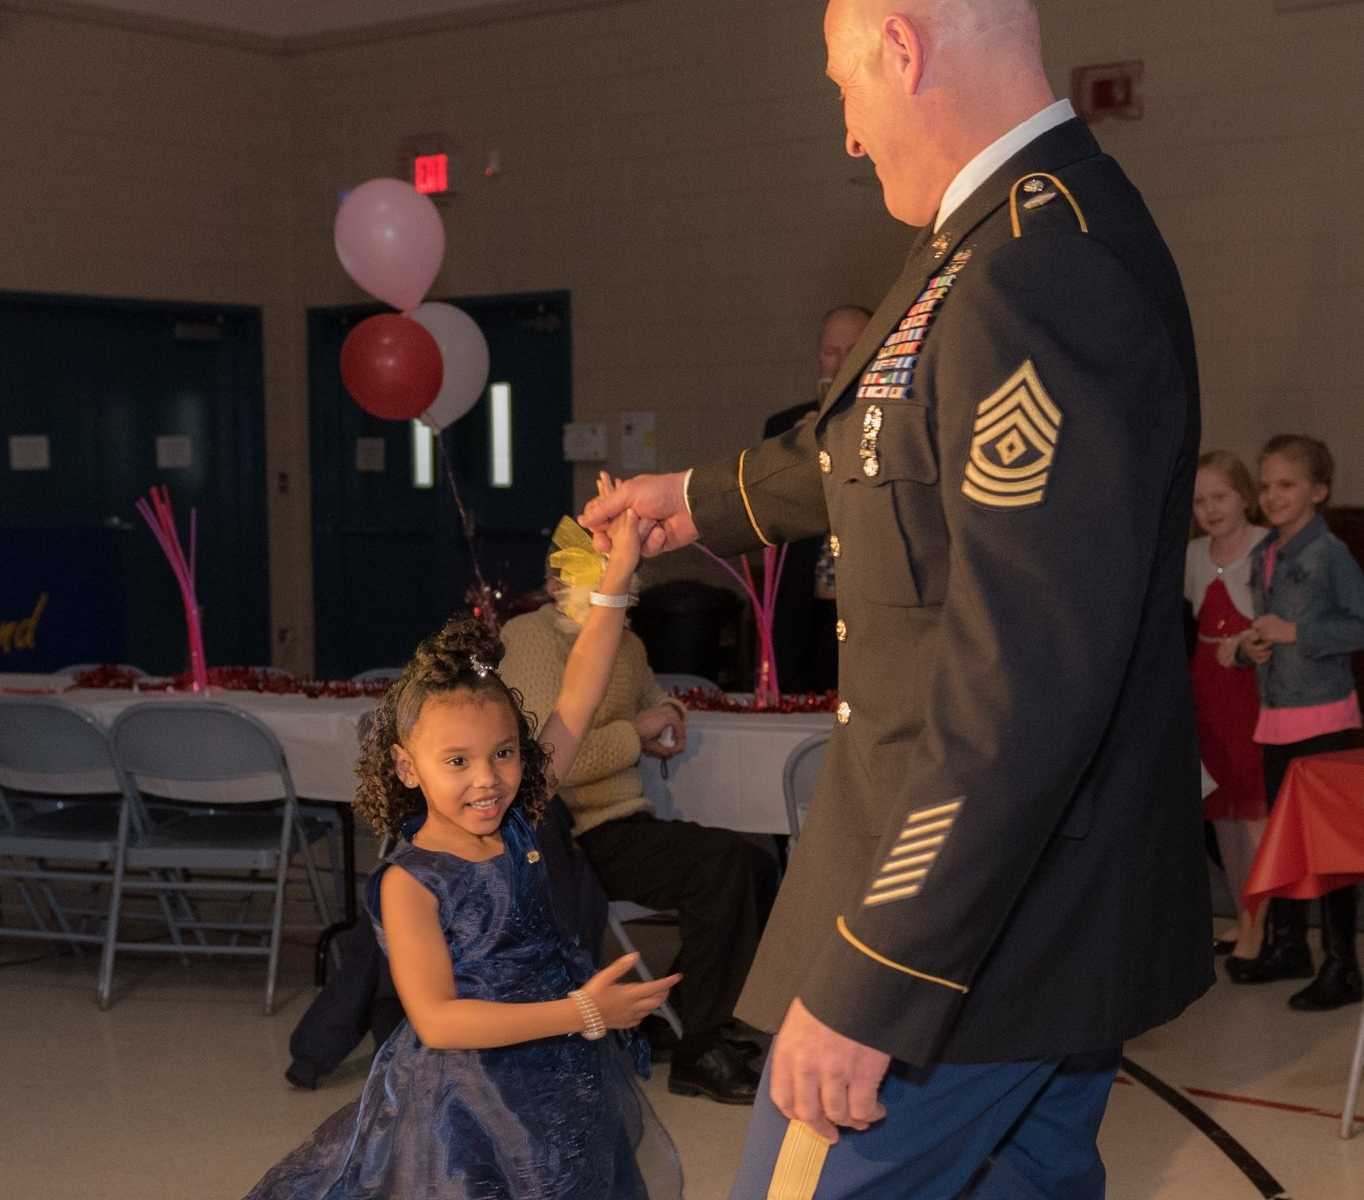 national guard soldier twirling little girl in gymnasium with table and pink balloons in background